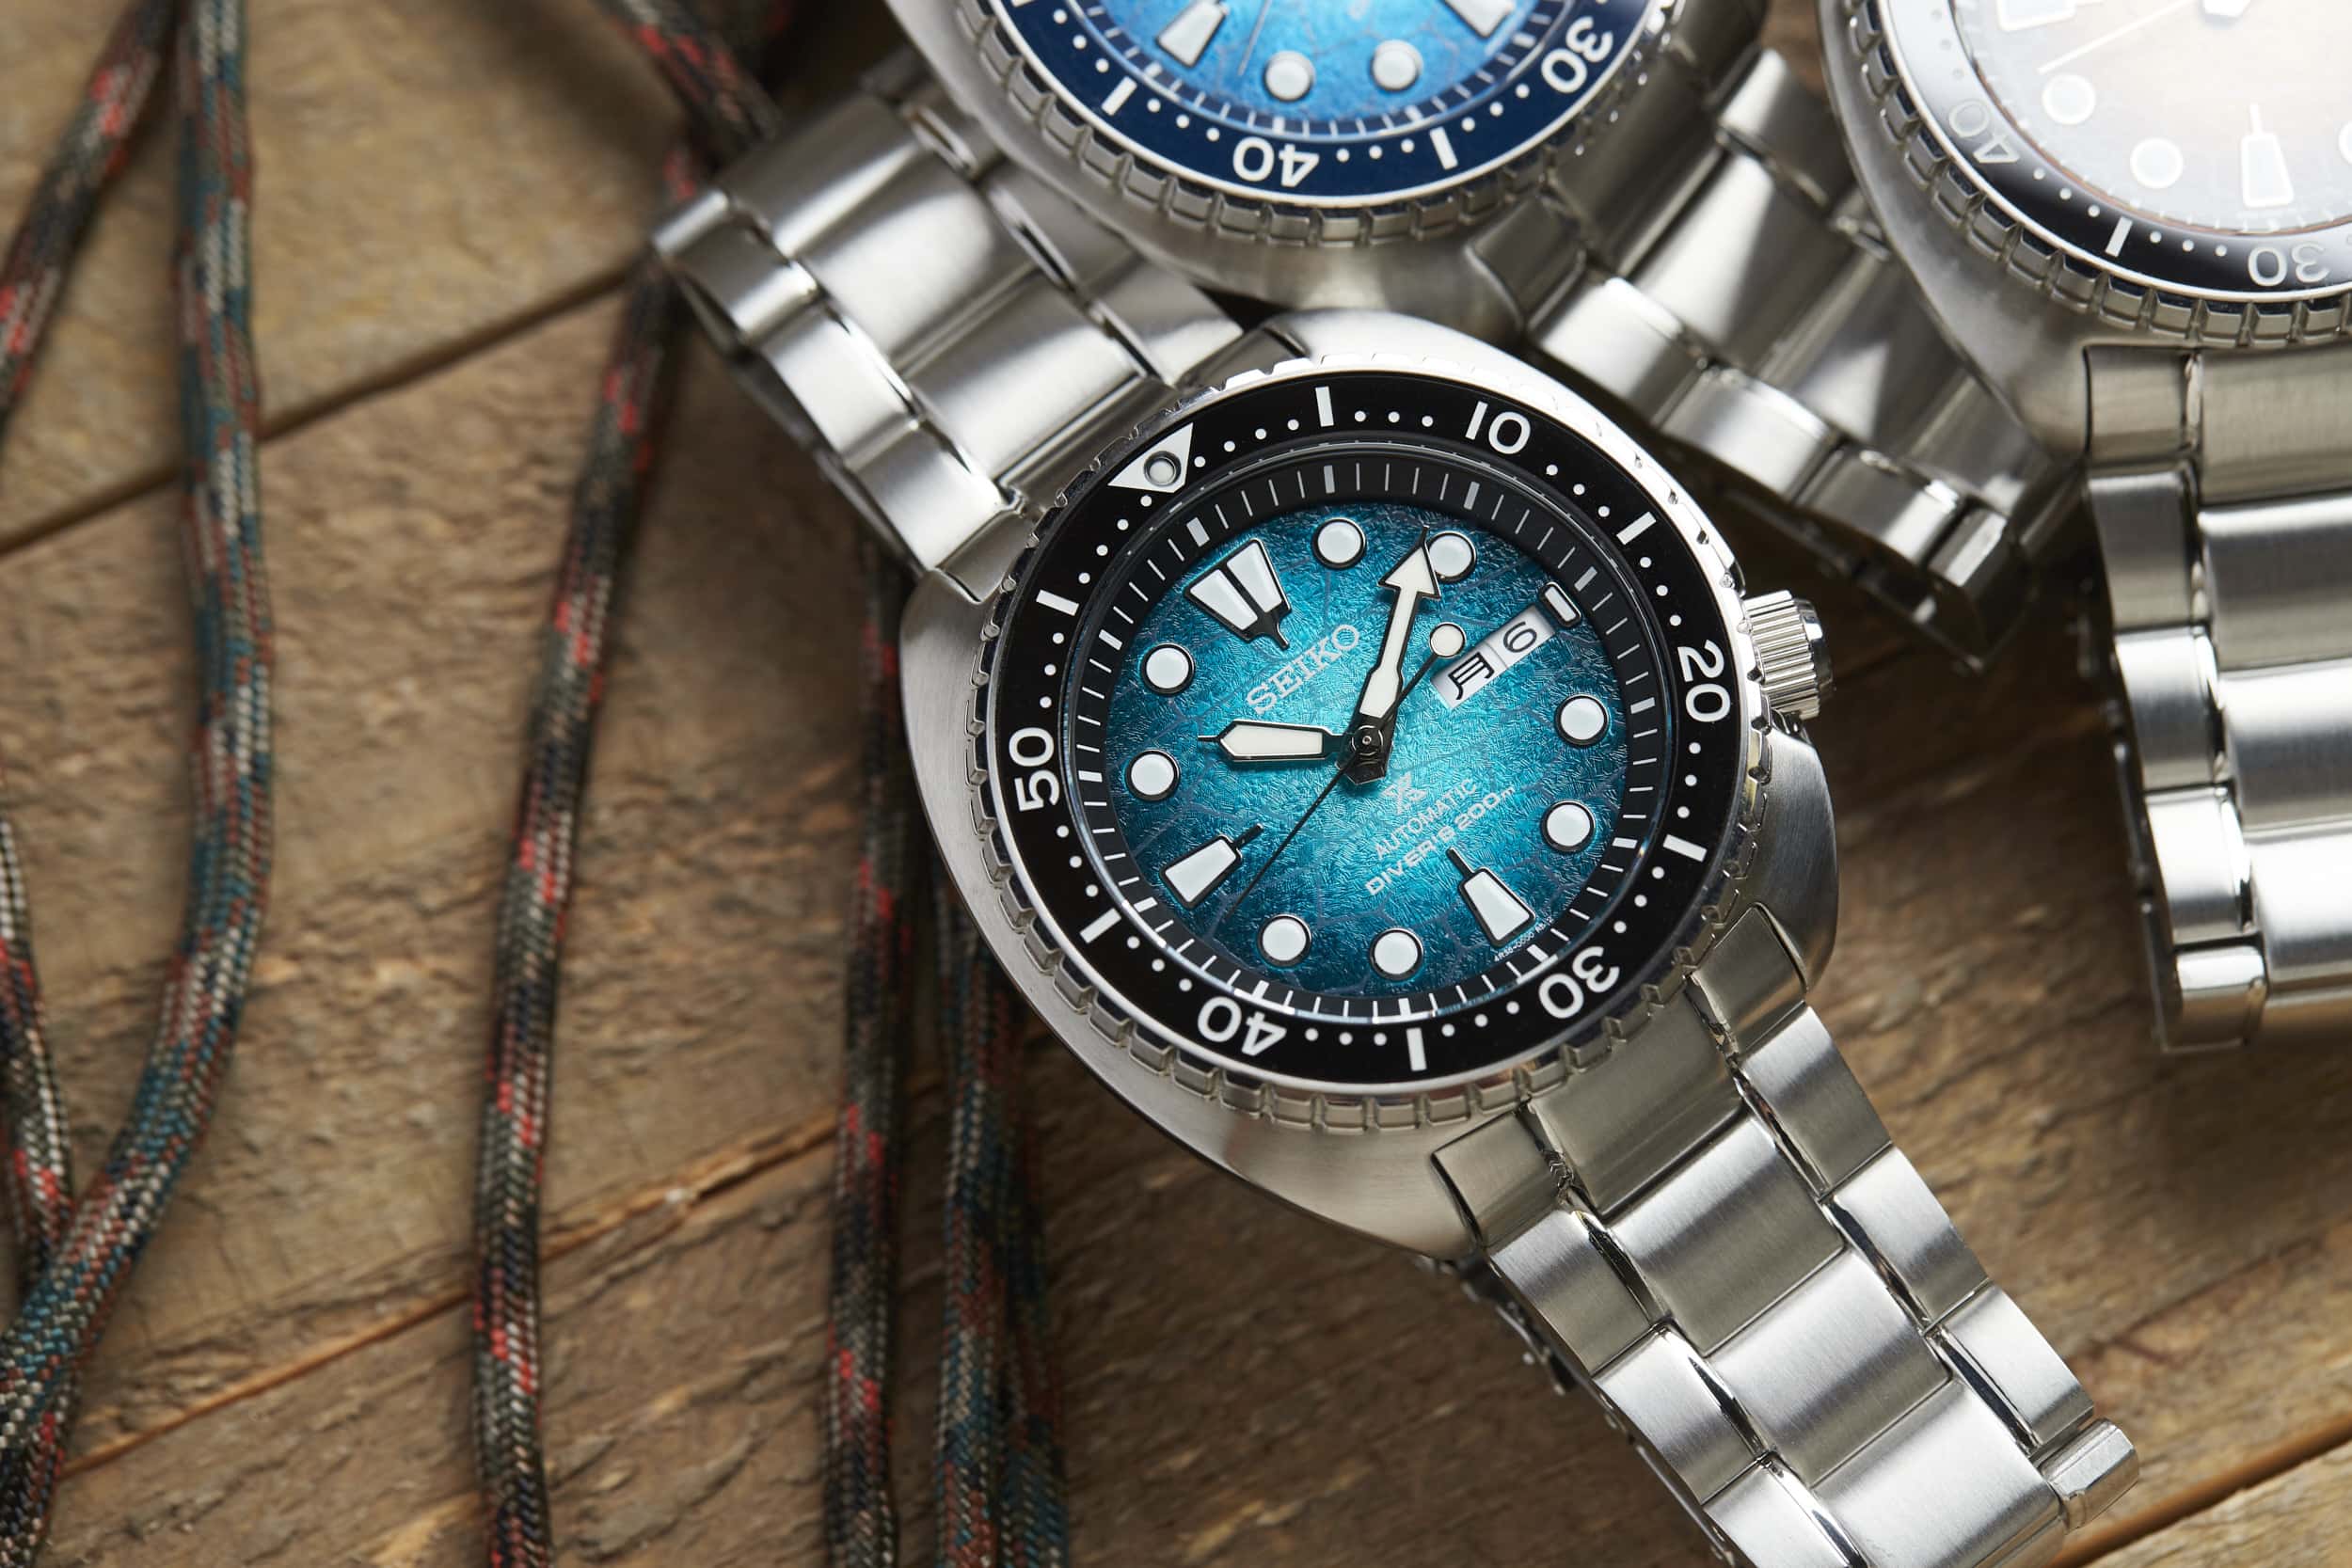 The Return of the Turtle: Seiko Brings Back a Classic - Worn & Wound